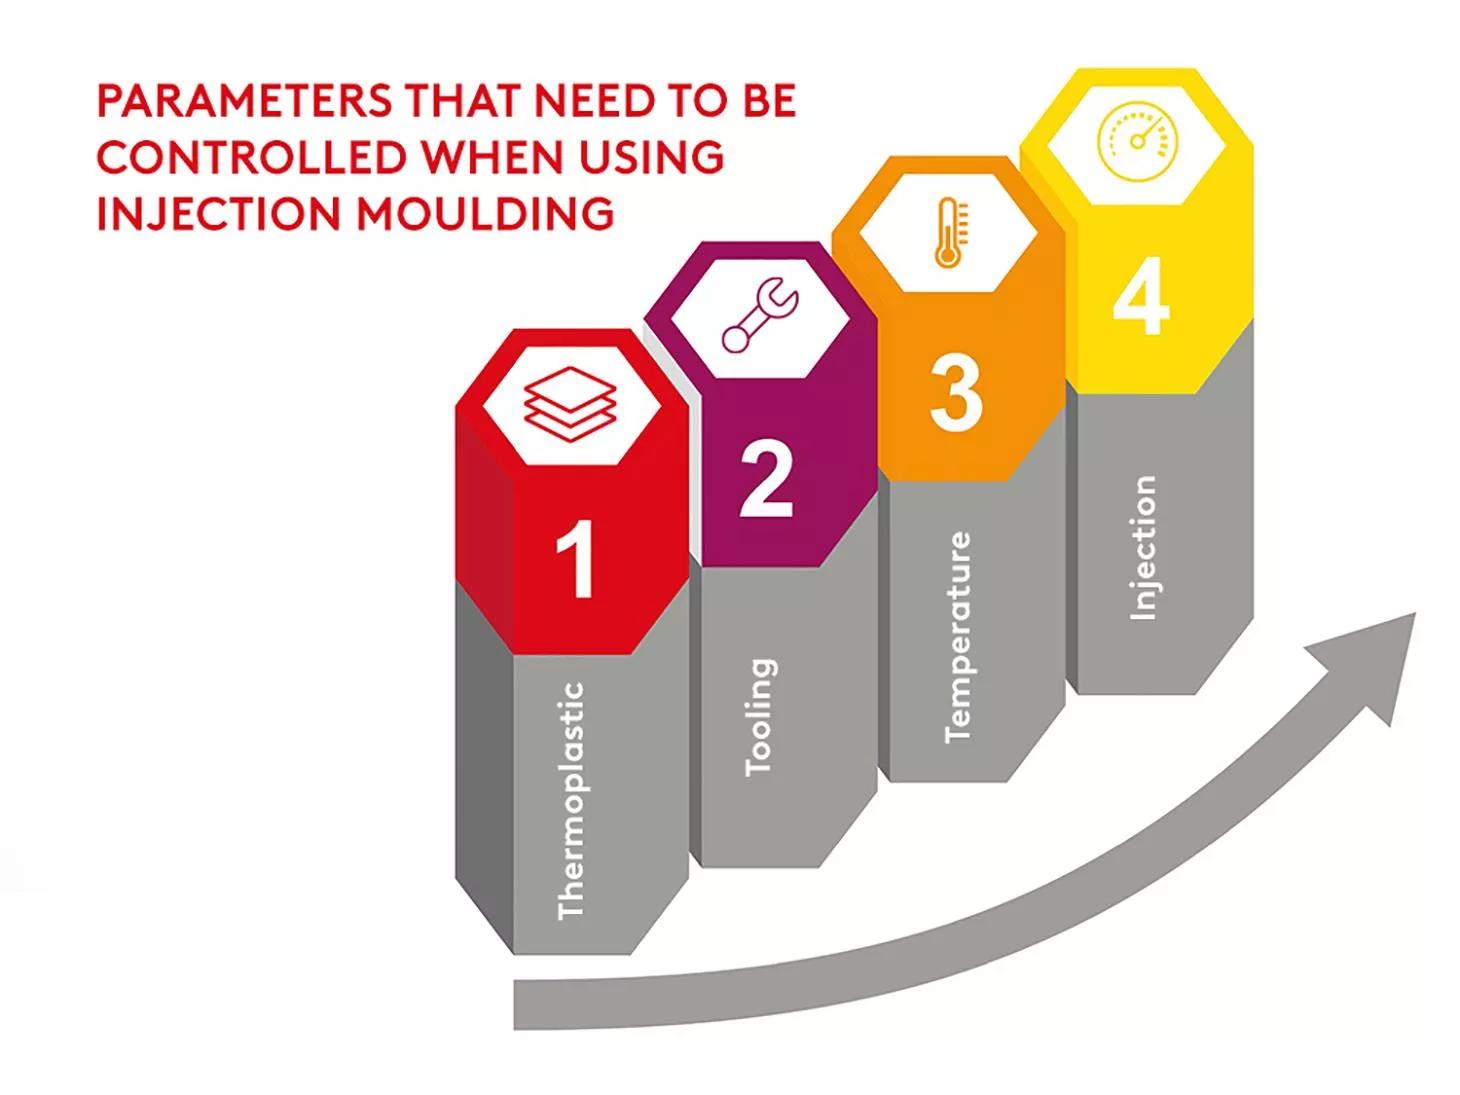 Parameters that need to be controlled when using injection moulding